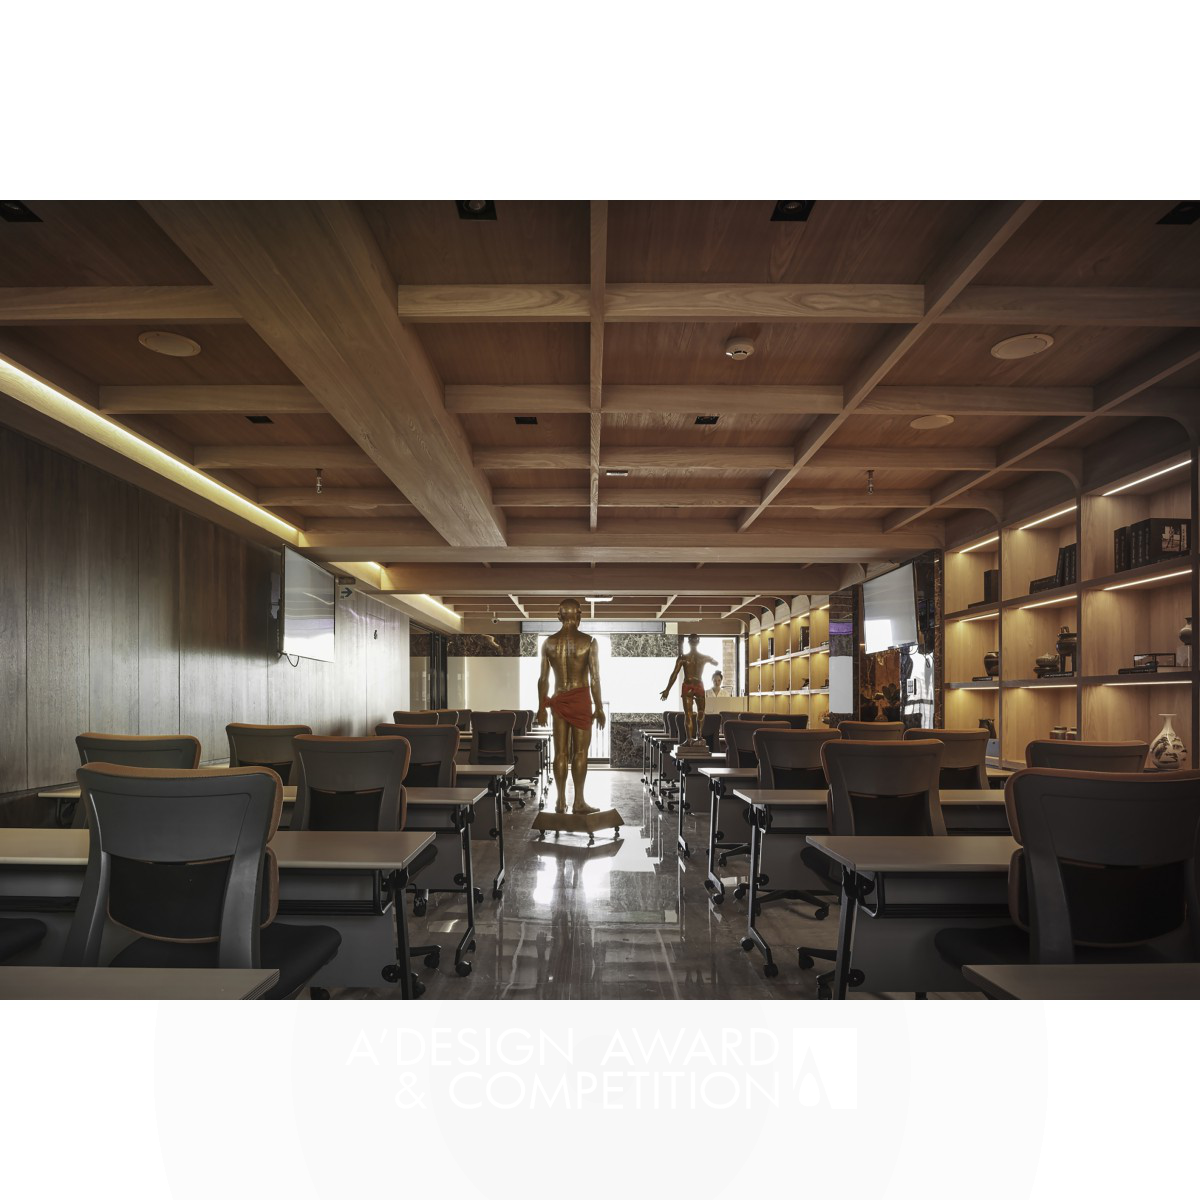 Oriental Wisdom Office by Ting Hao Juan and Nien Chu Juan Bronze Interior Space and Exhibition Design Award Winner 2021 